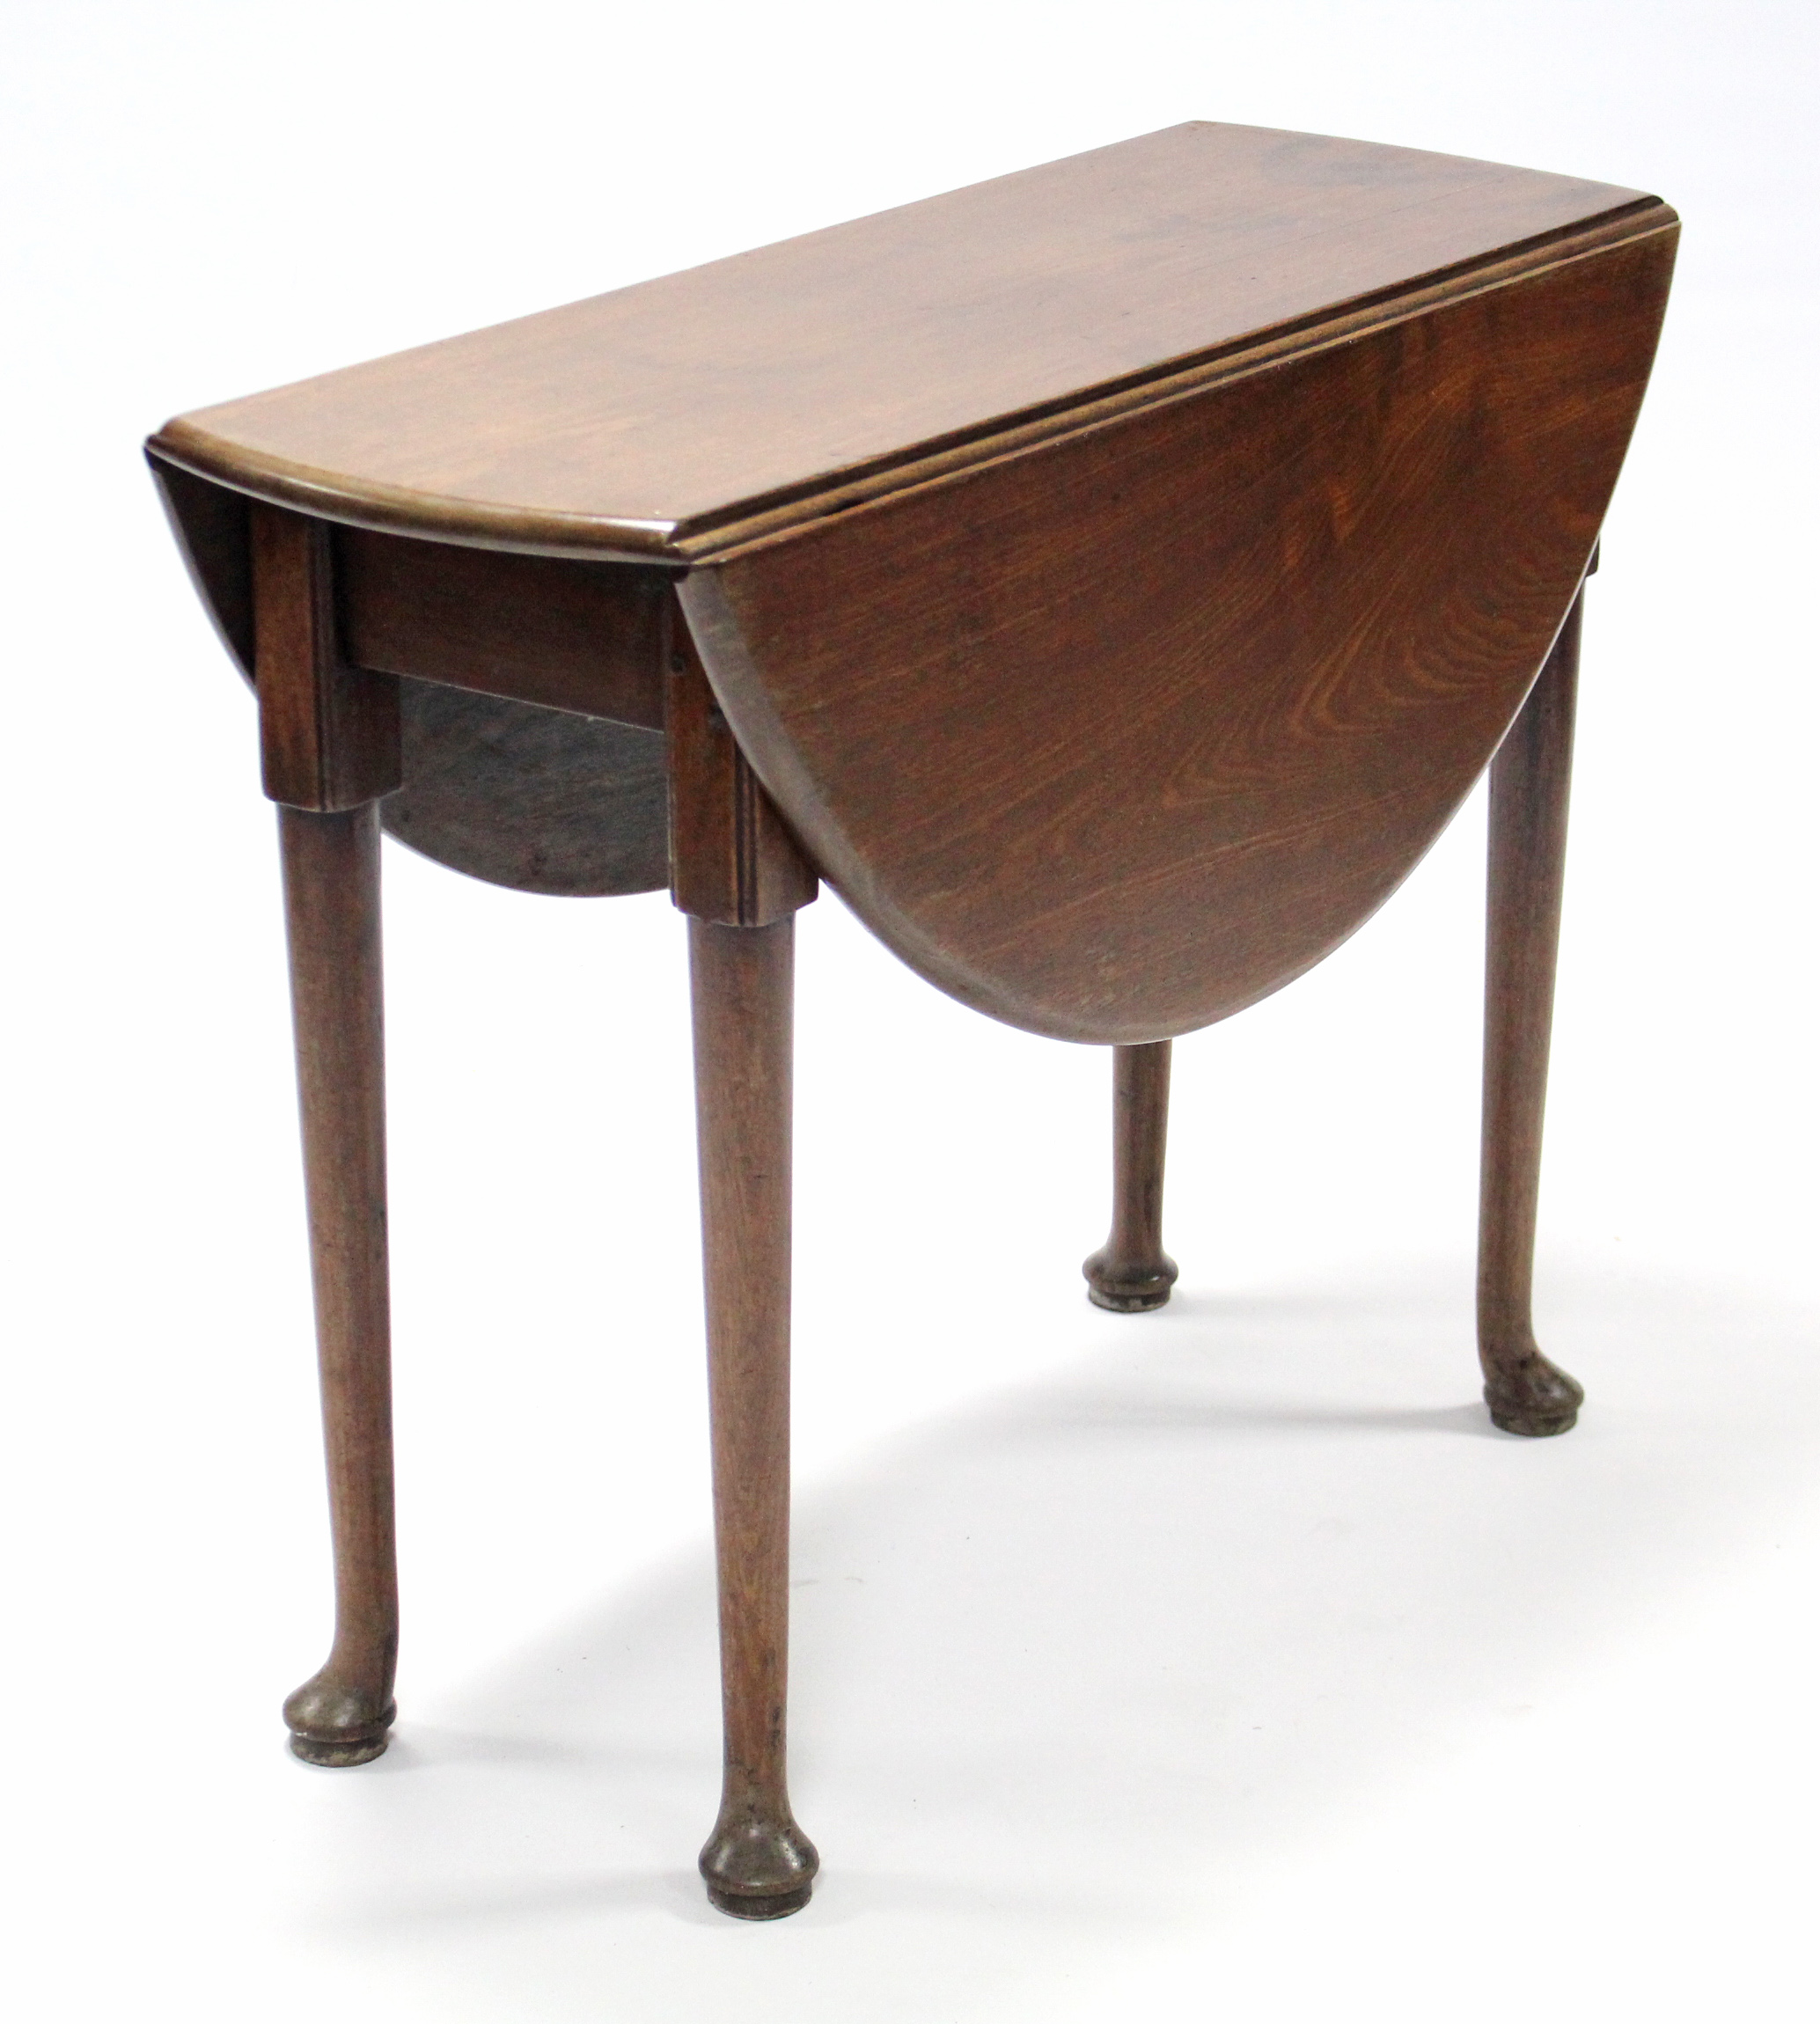 A Georgian mahogany drop-leaf supper table, with circular top on slender turned legs with pad